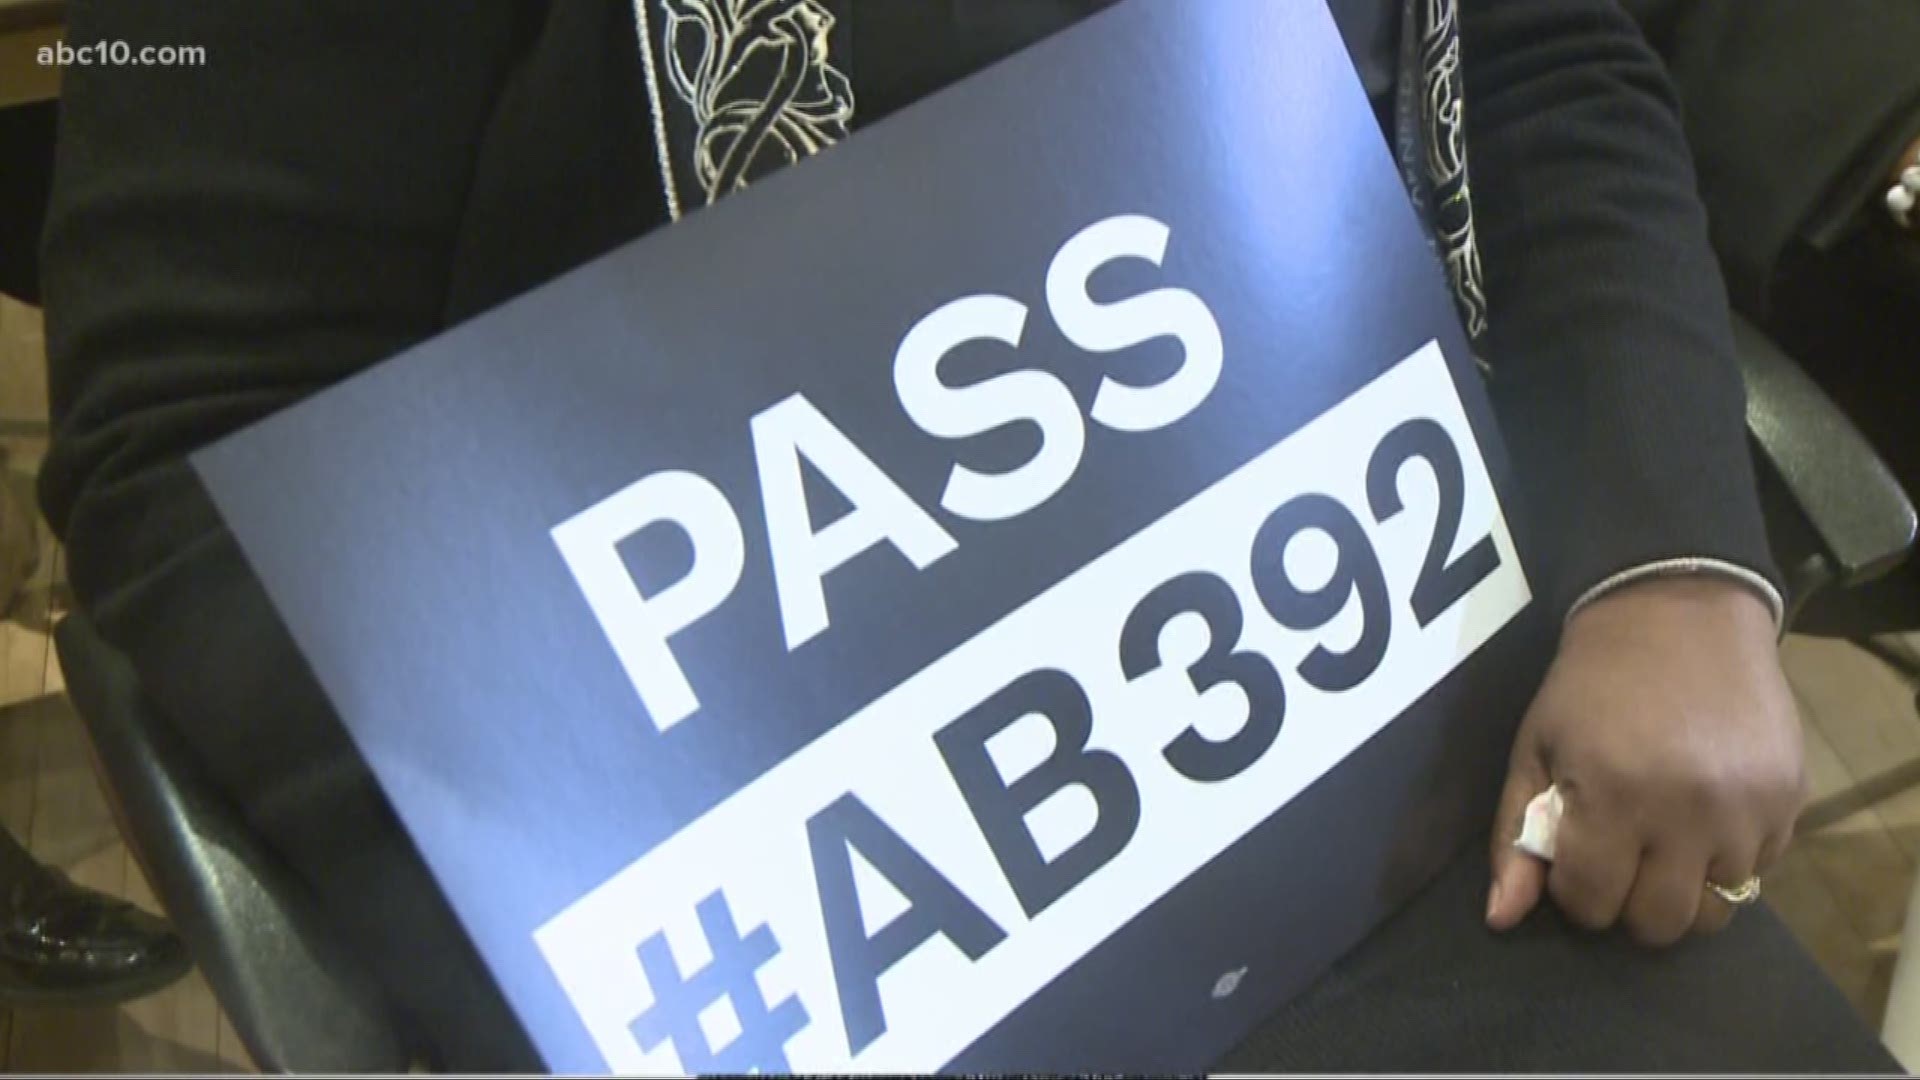 With the merging of SB 230 and AB 293, both sides of the police use-of-force debate come together in a call for reform.